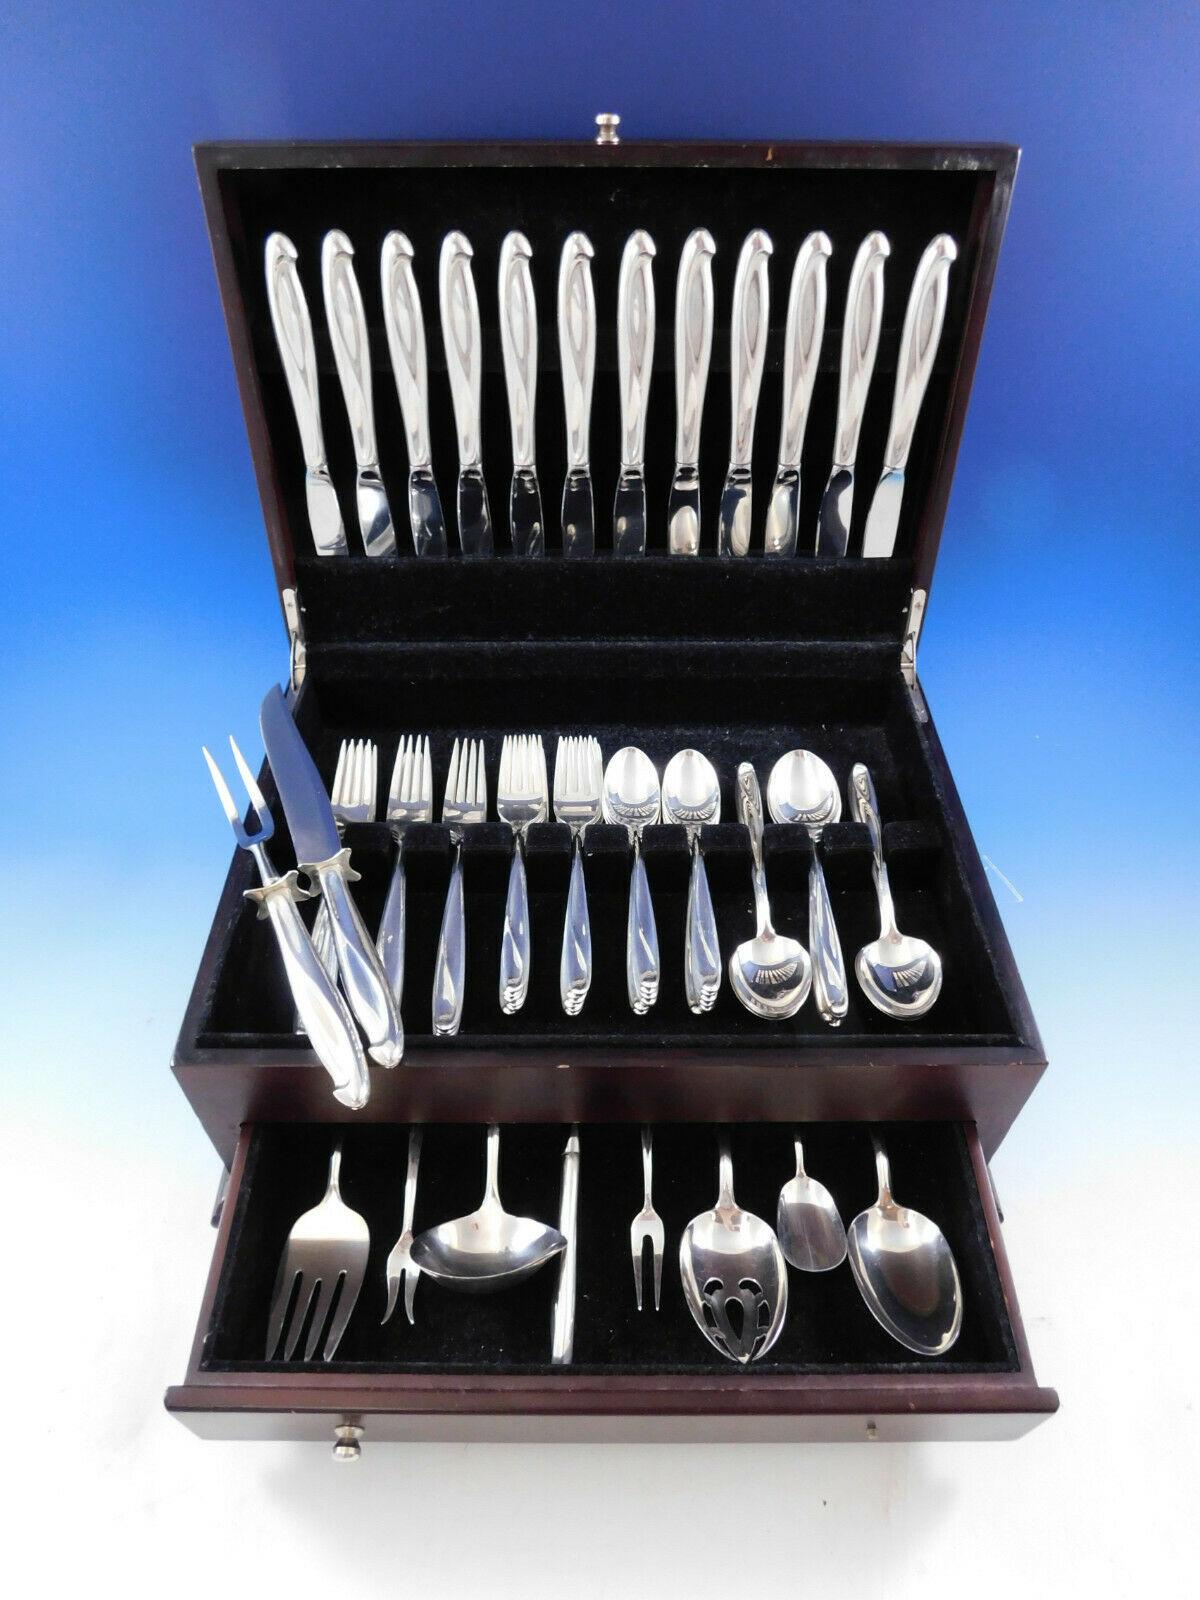 Large silver sculpture by Reed and Barton sterling silver flatware set of 70 pieces. (See photo of Reed & Barton's 1954 advertisement, as illustrated in Modernism in American Silver by Stern book.) This set includes:

12 knives, 9